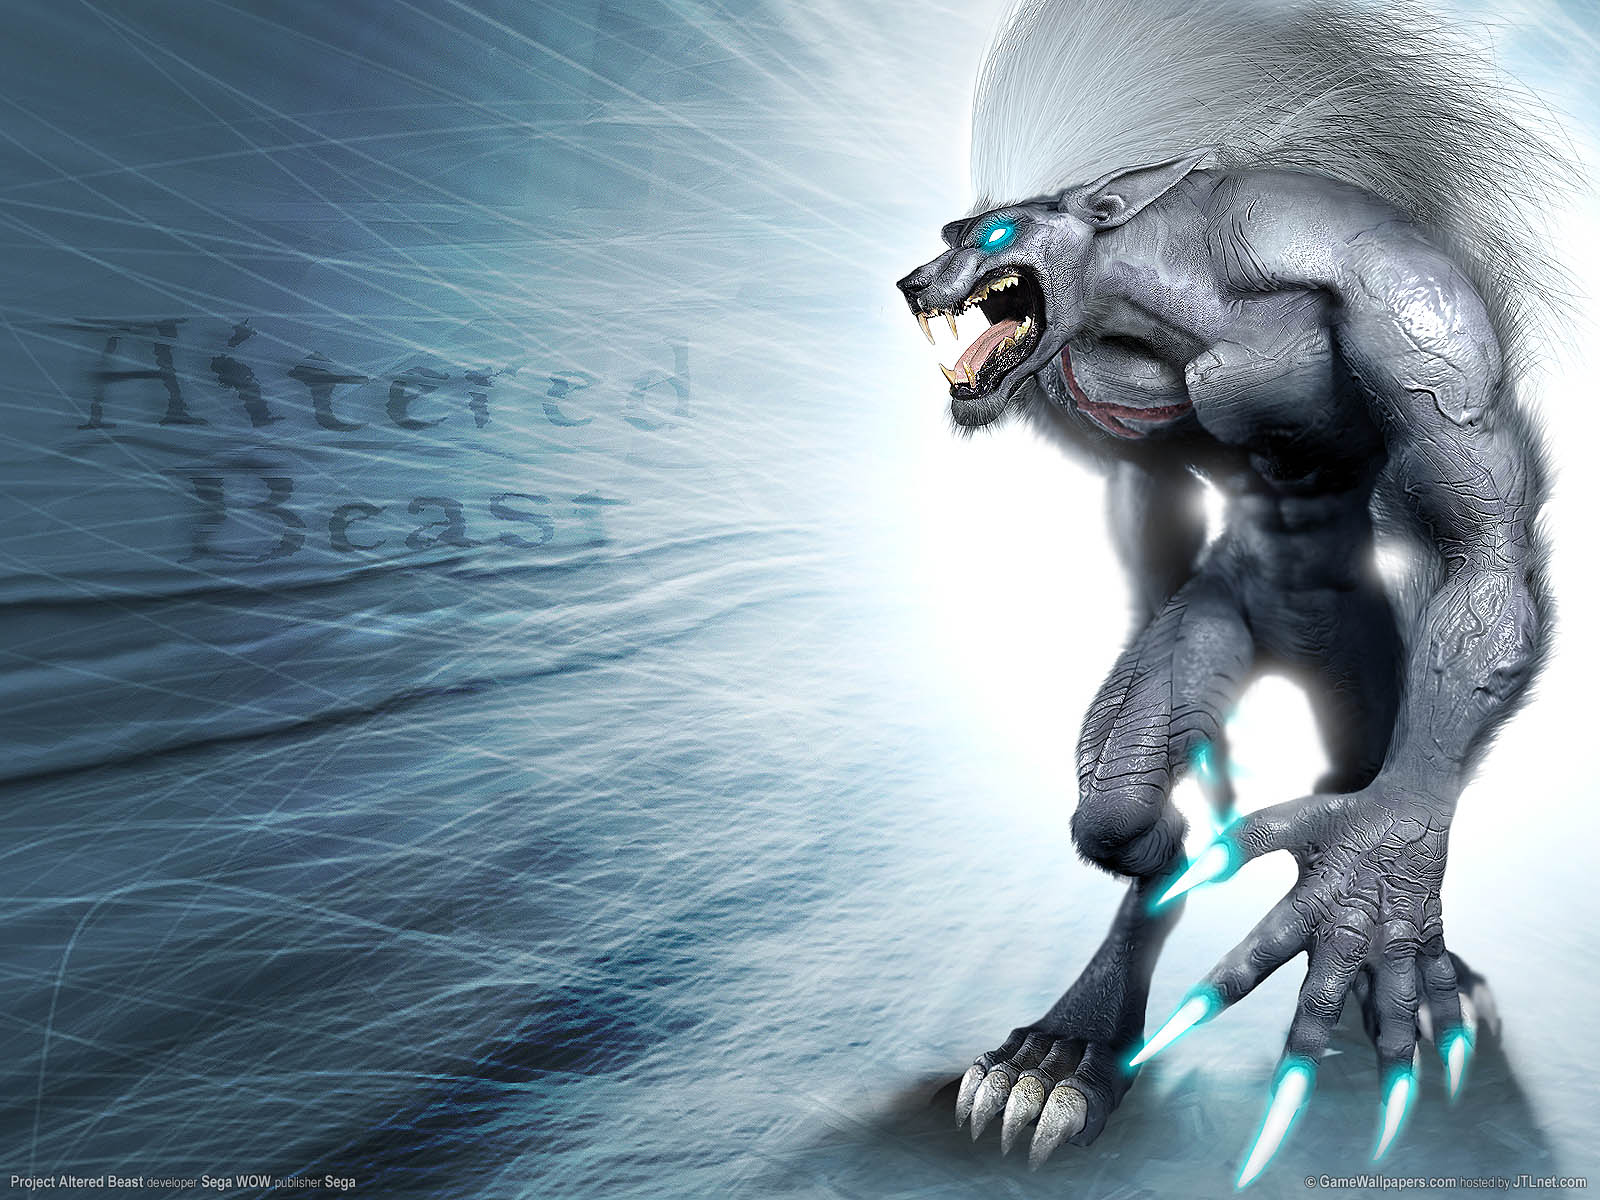 Project Altered Beast achtergrond 01 1600x1200